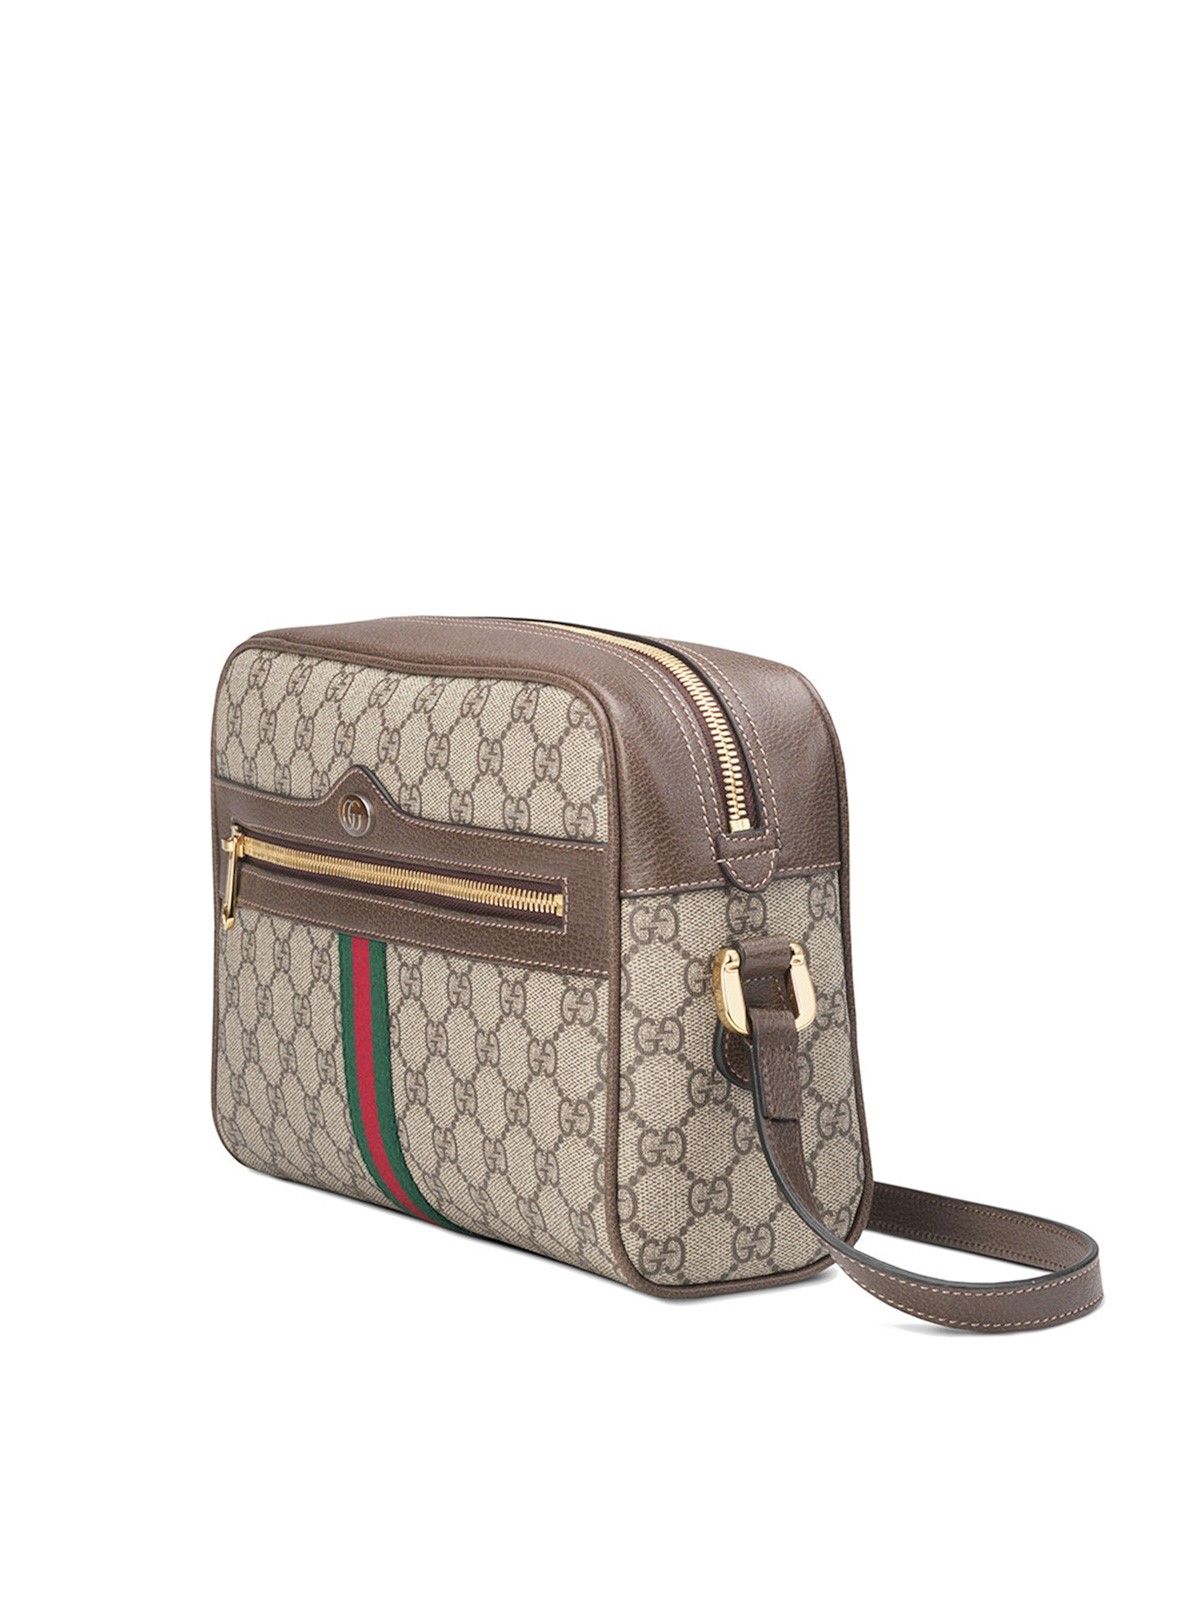 gucci OPHIDIA SHOULDER BAG available on www.semadata.org - 22340